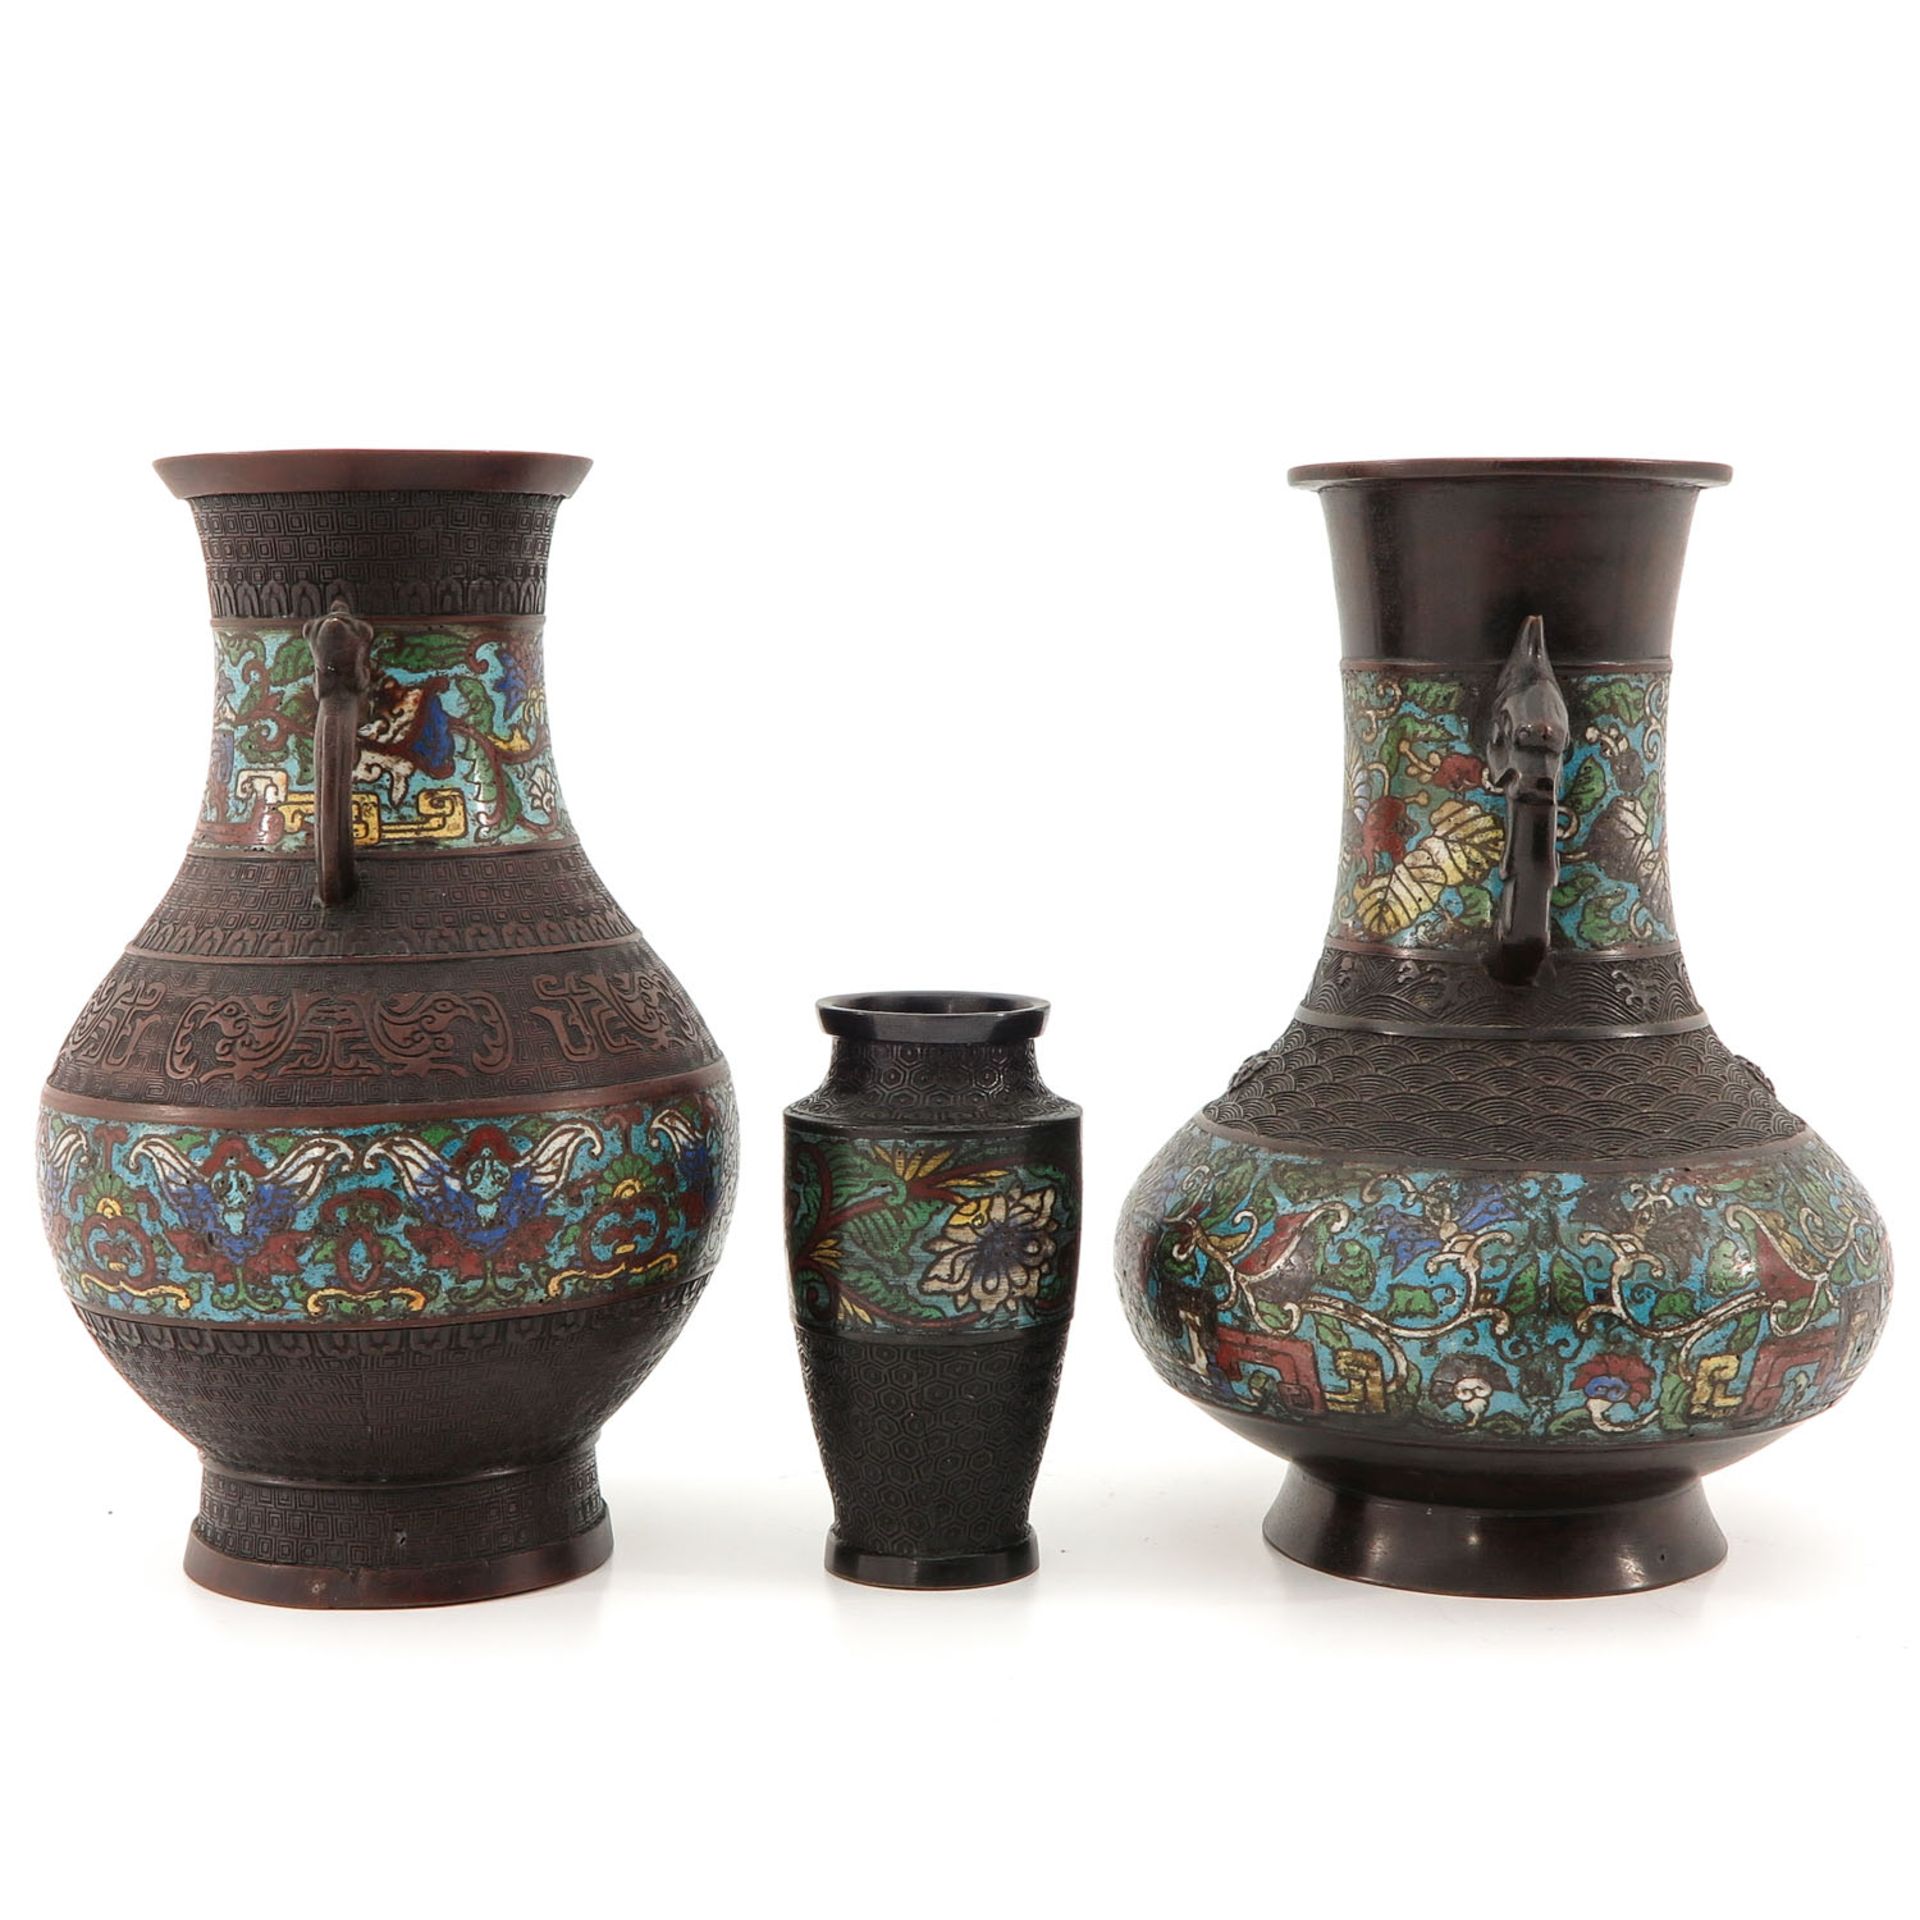 A Collection of 3 Cloisonne Vases - Image 2 of 10